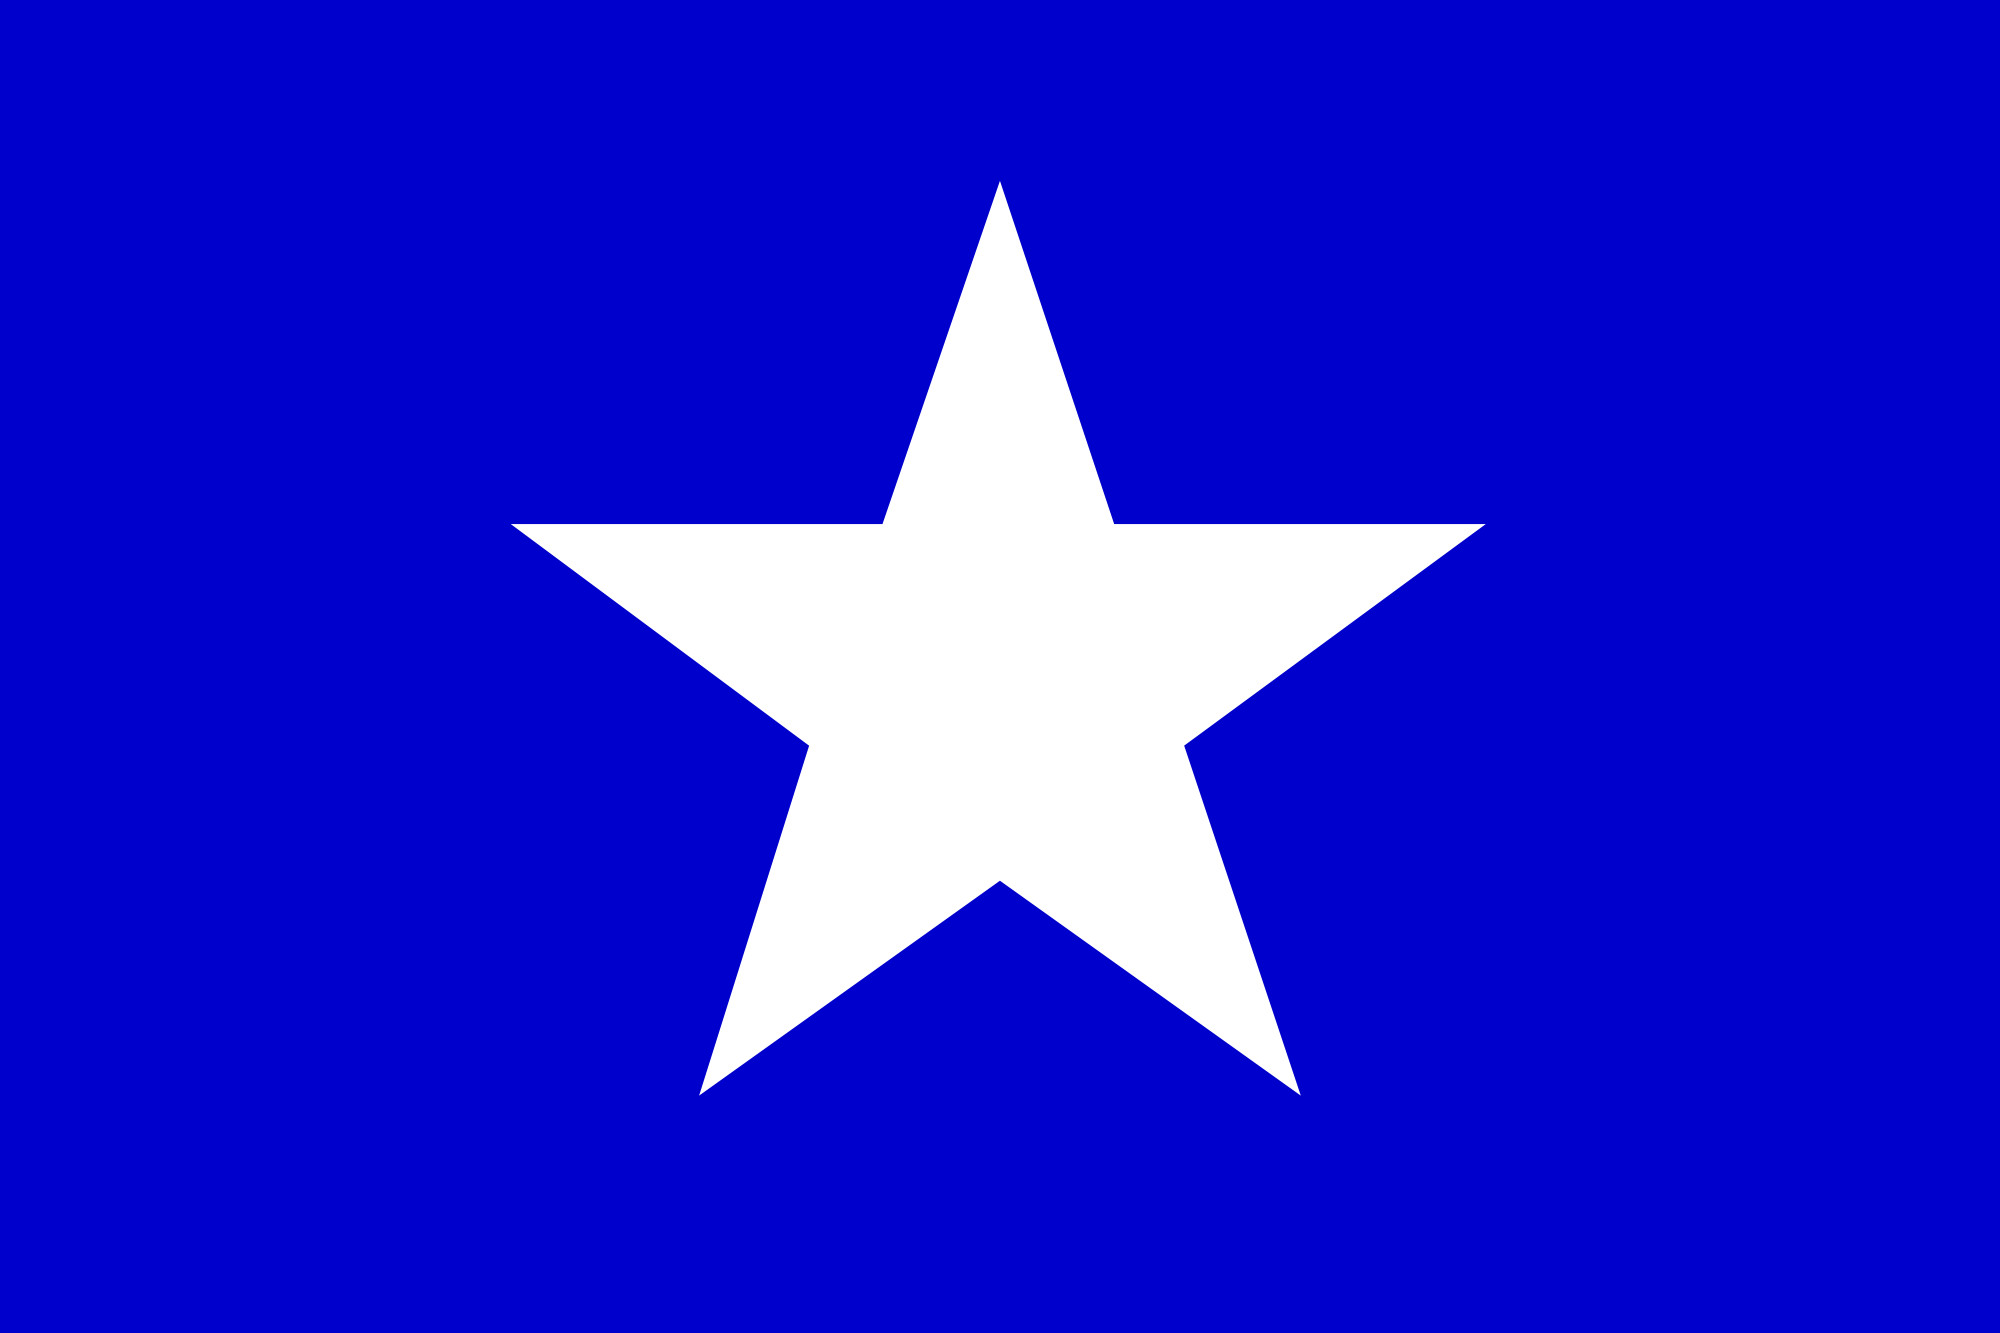 2000x1333 Flag of Madison, Wisconsin - Flags of cities of the United States -  Wikipedia, the free encyclopedia | Flag Project | Pinterest | Wisconsin flag,  ...